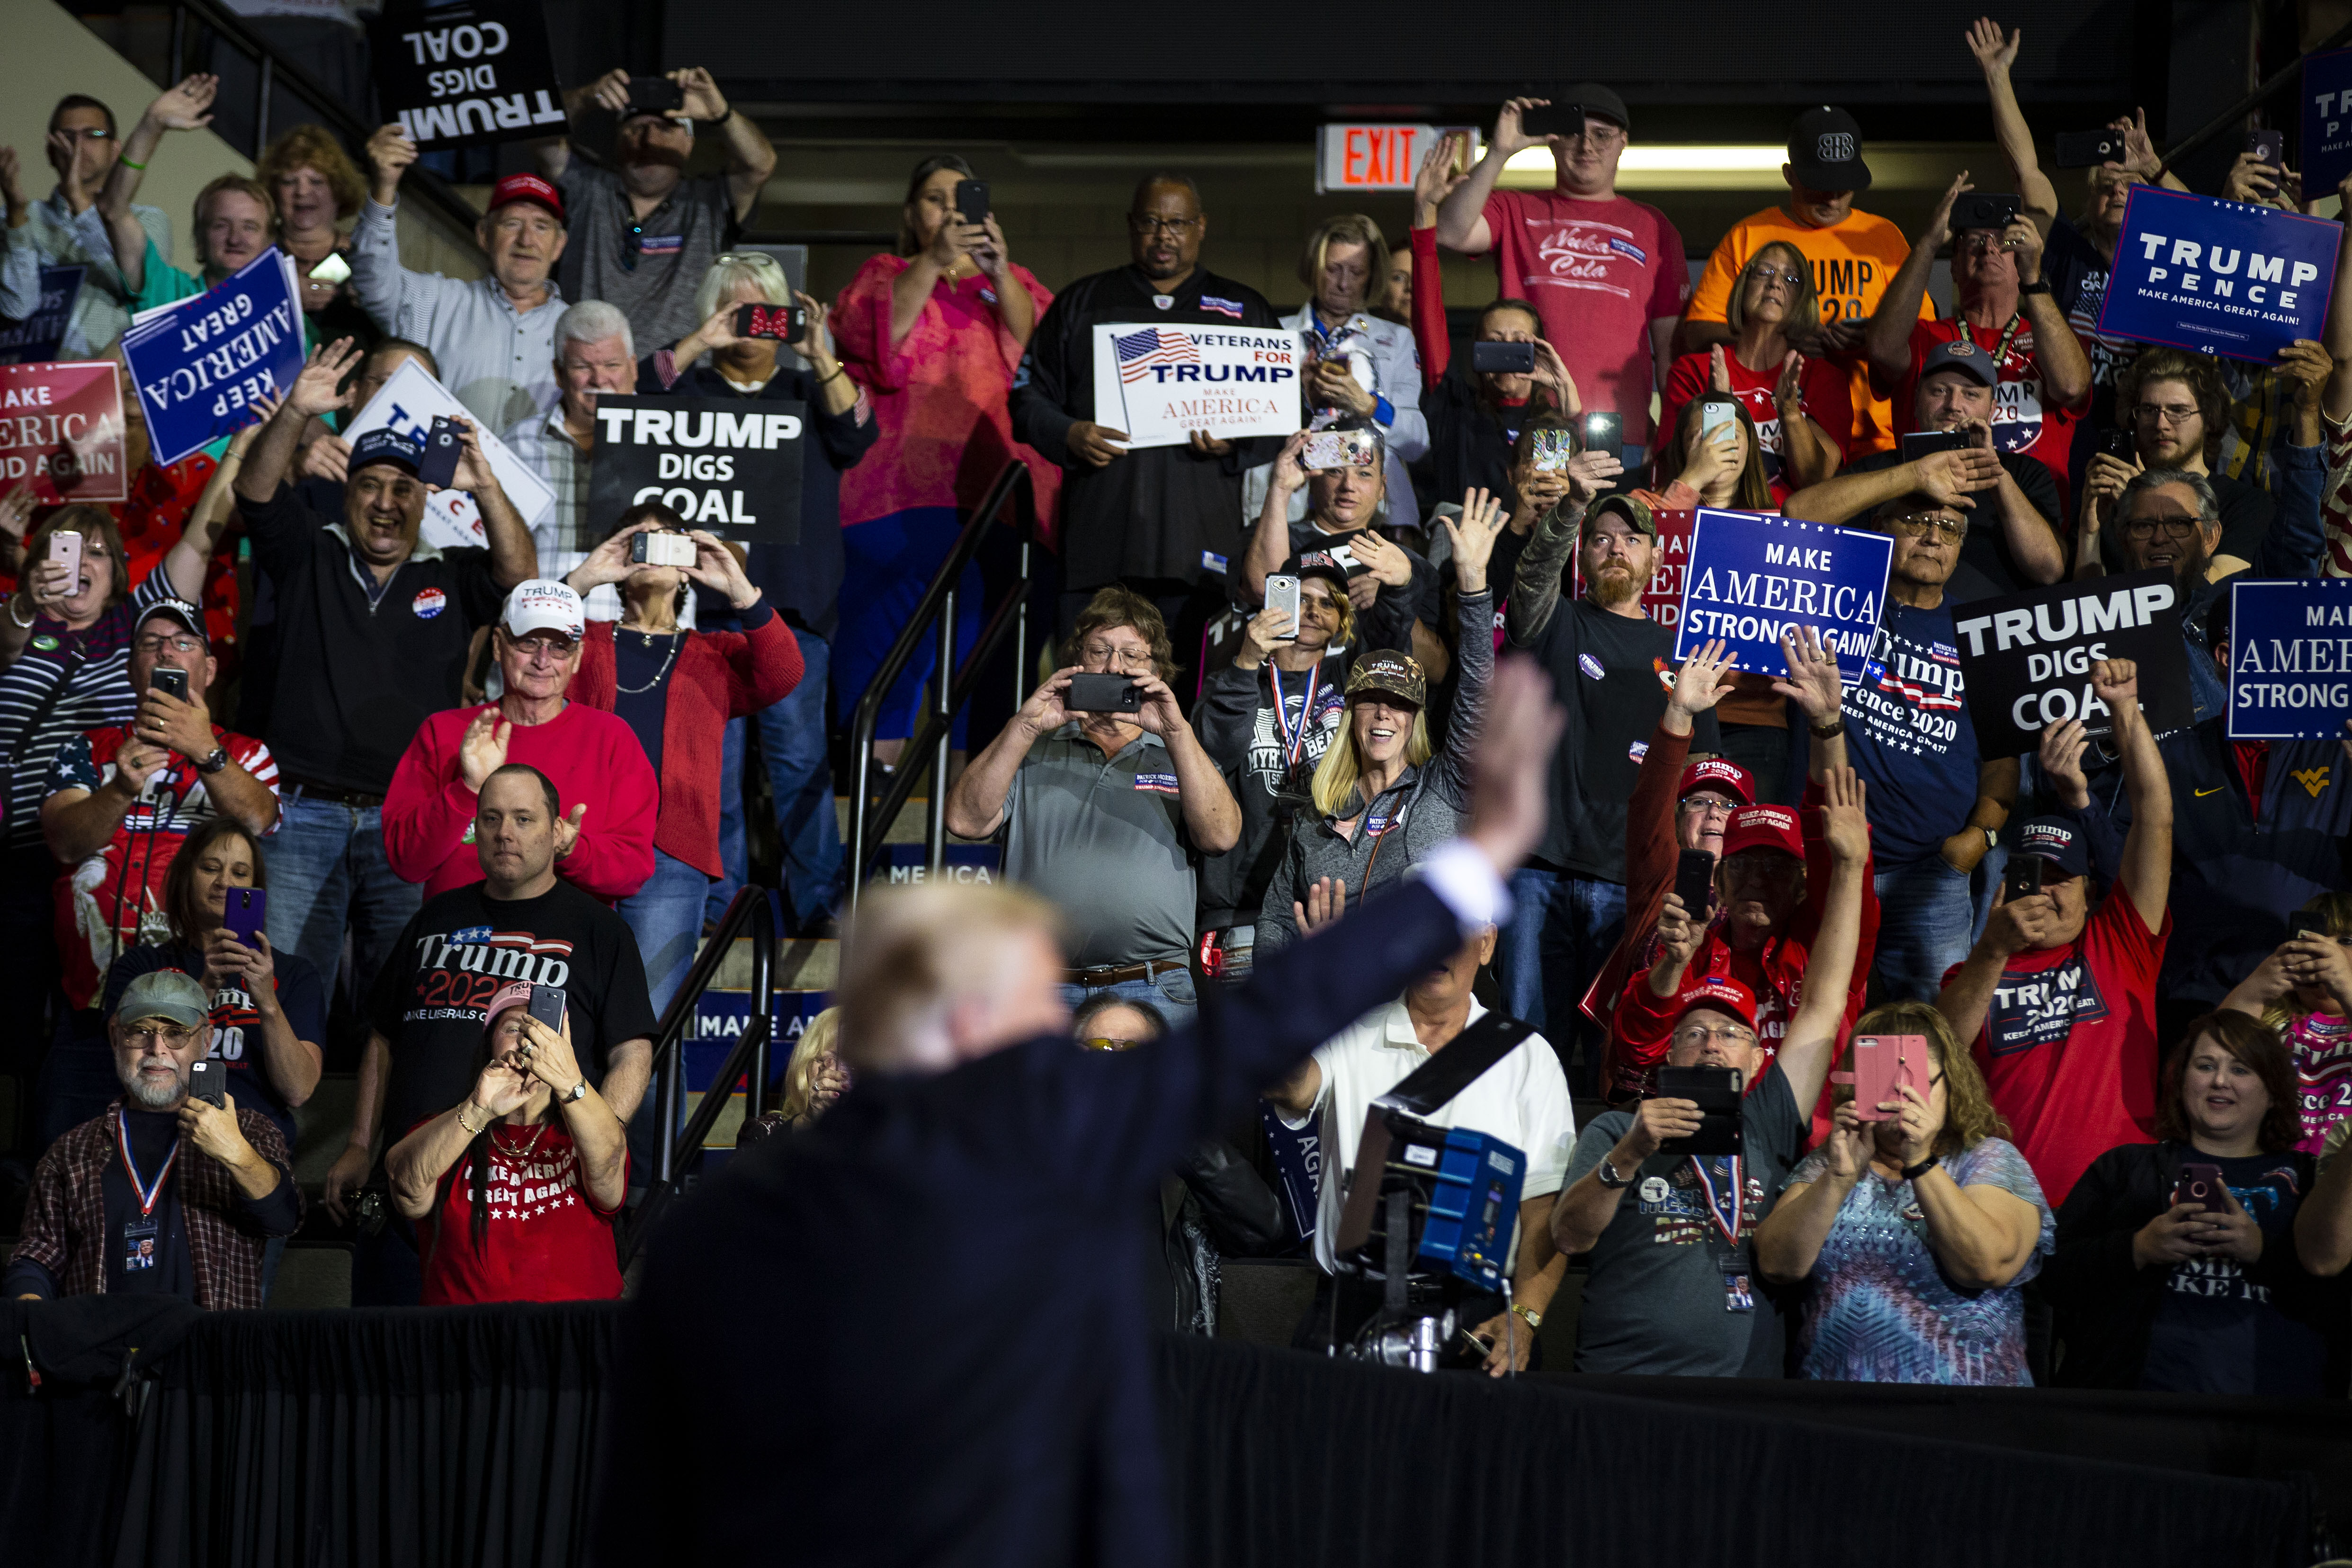 A crowd cheers as President Donald Trump arrives to speak during a rally at Wesbanco Arena, in Wheeling, W.Va. in September 2018. At NPR, Asma Khalid met with over 50 Republican voters across Ohio, Georgia, and West Virginia in order to assess the strength of the electoral coalition that had helped Trump to win in 2016